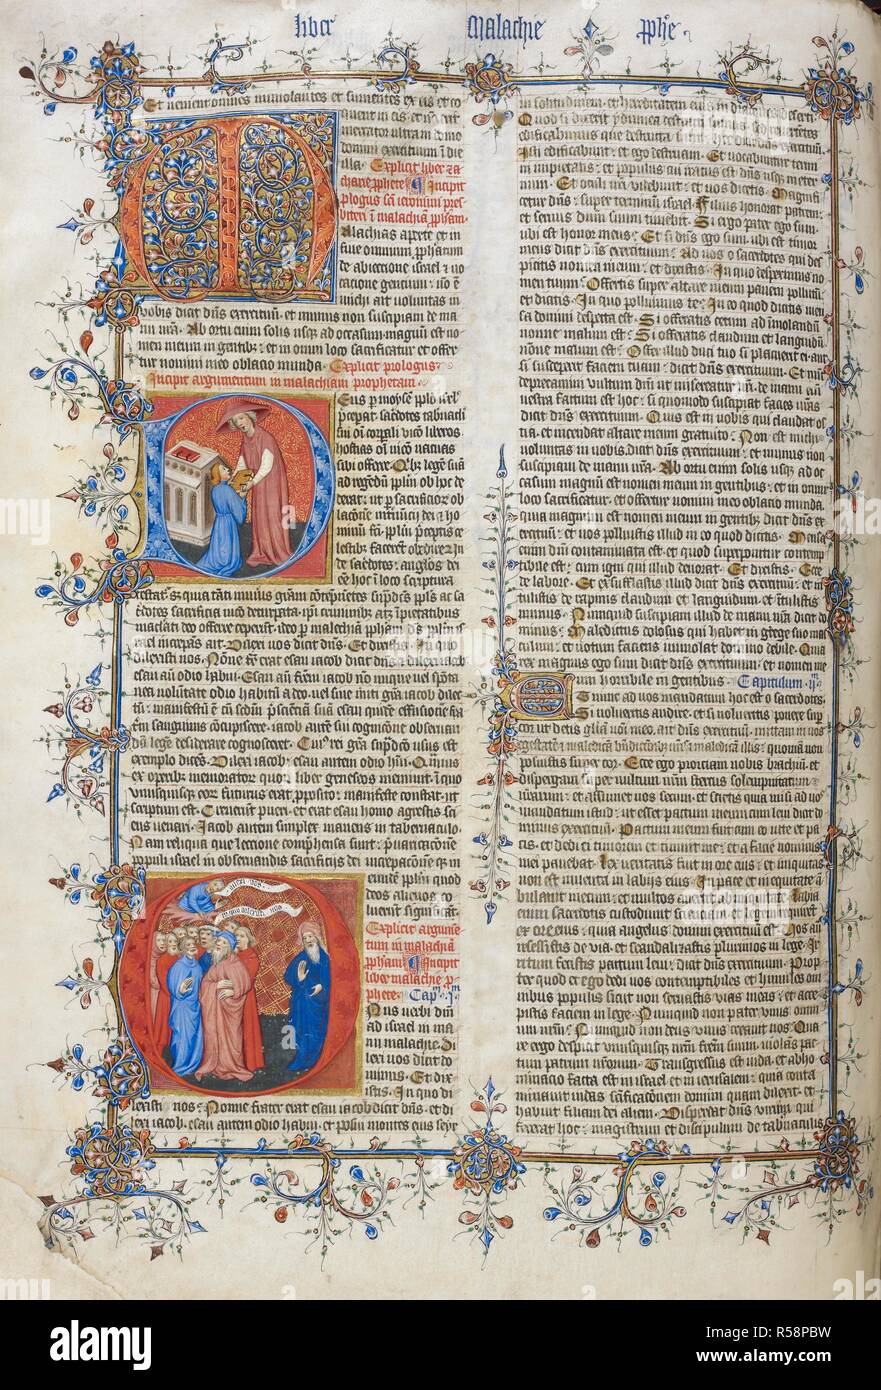 Opening of the Book of Malachi: decorated initial 'M'; initials 'D' and 'O' with miniatures. Great Bible (St. Jerome version). England (London?), 1405-1415. Source: Royal 1 E. IX, f.239v. Language: Latin. Stock Photo